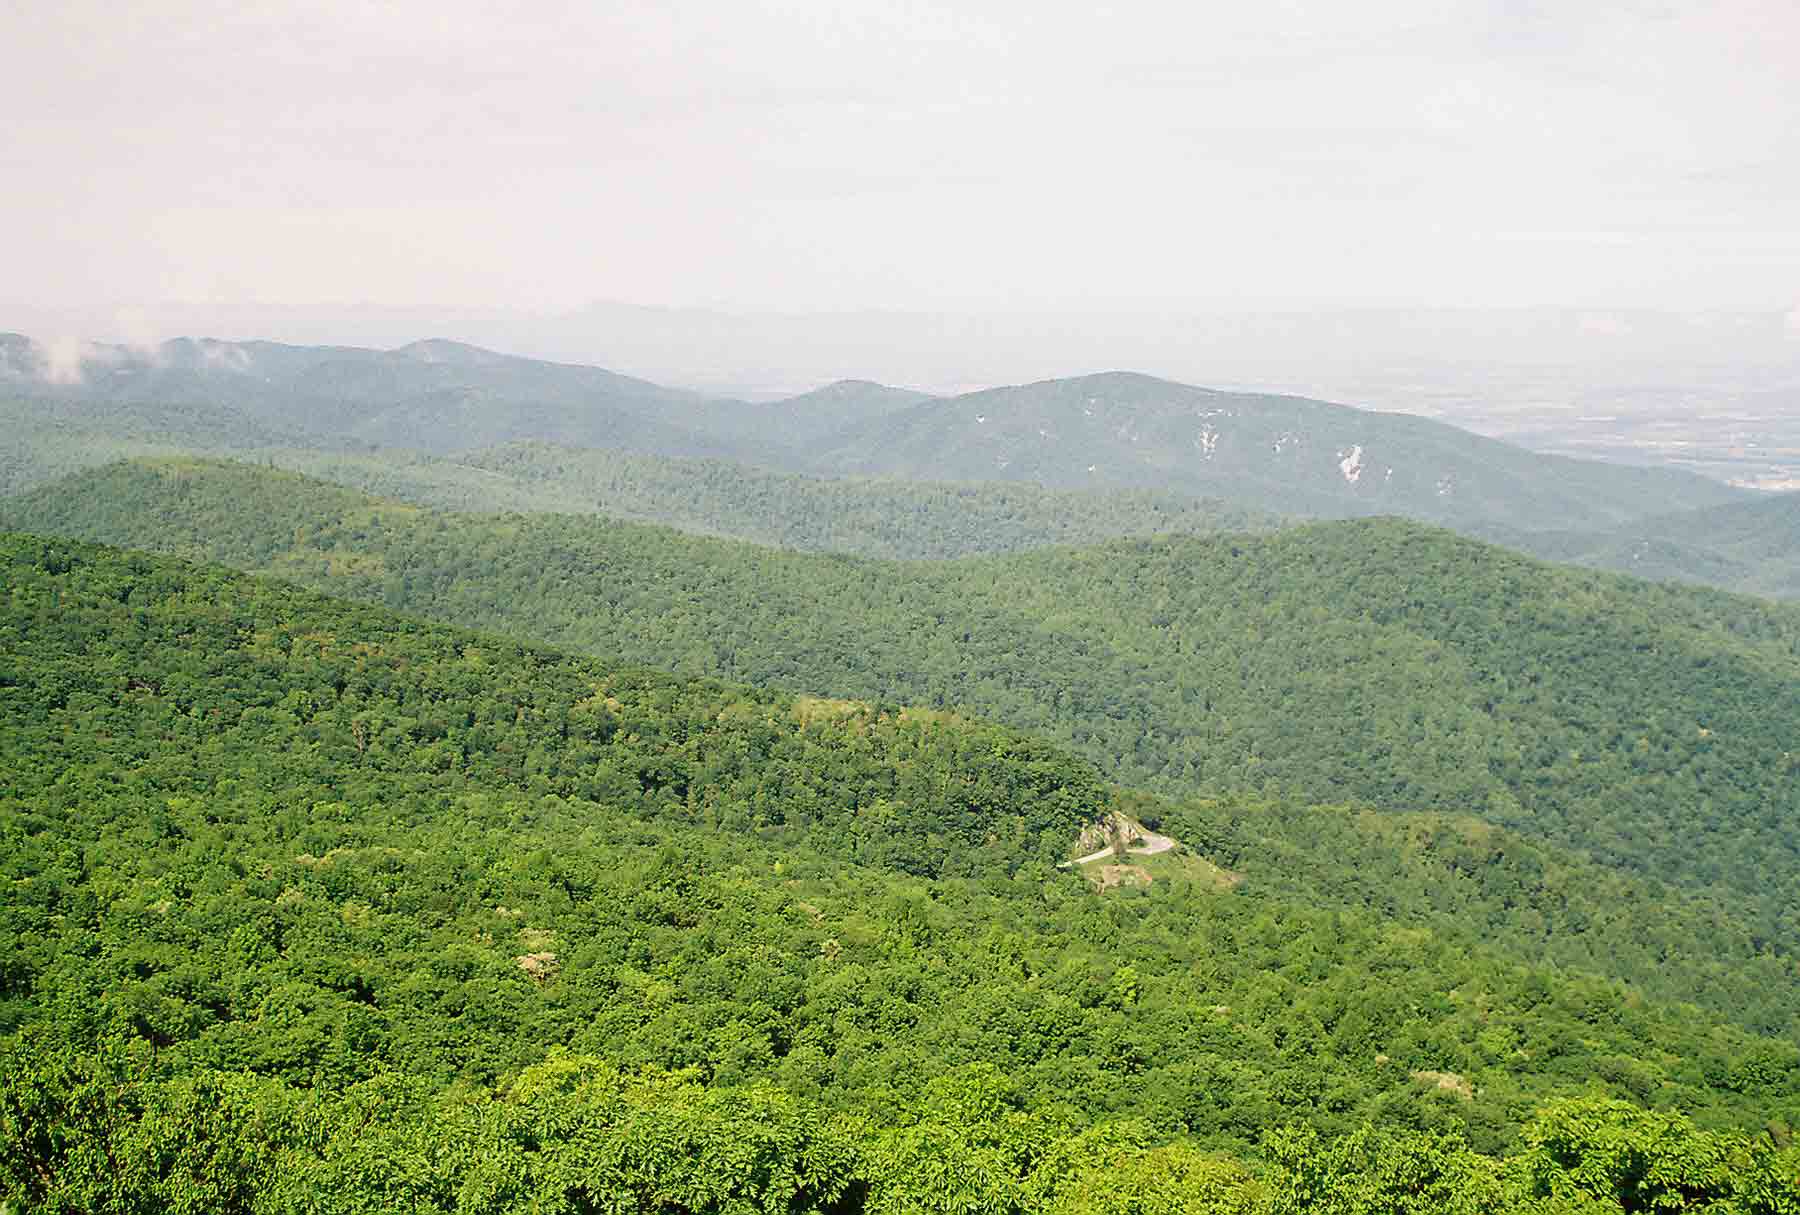 mm 2.8 - View from ledge near summit of Hightop, highest peak in South District of Shenandoah National Park.  Courtesy dlcul@conncoll.edu